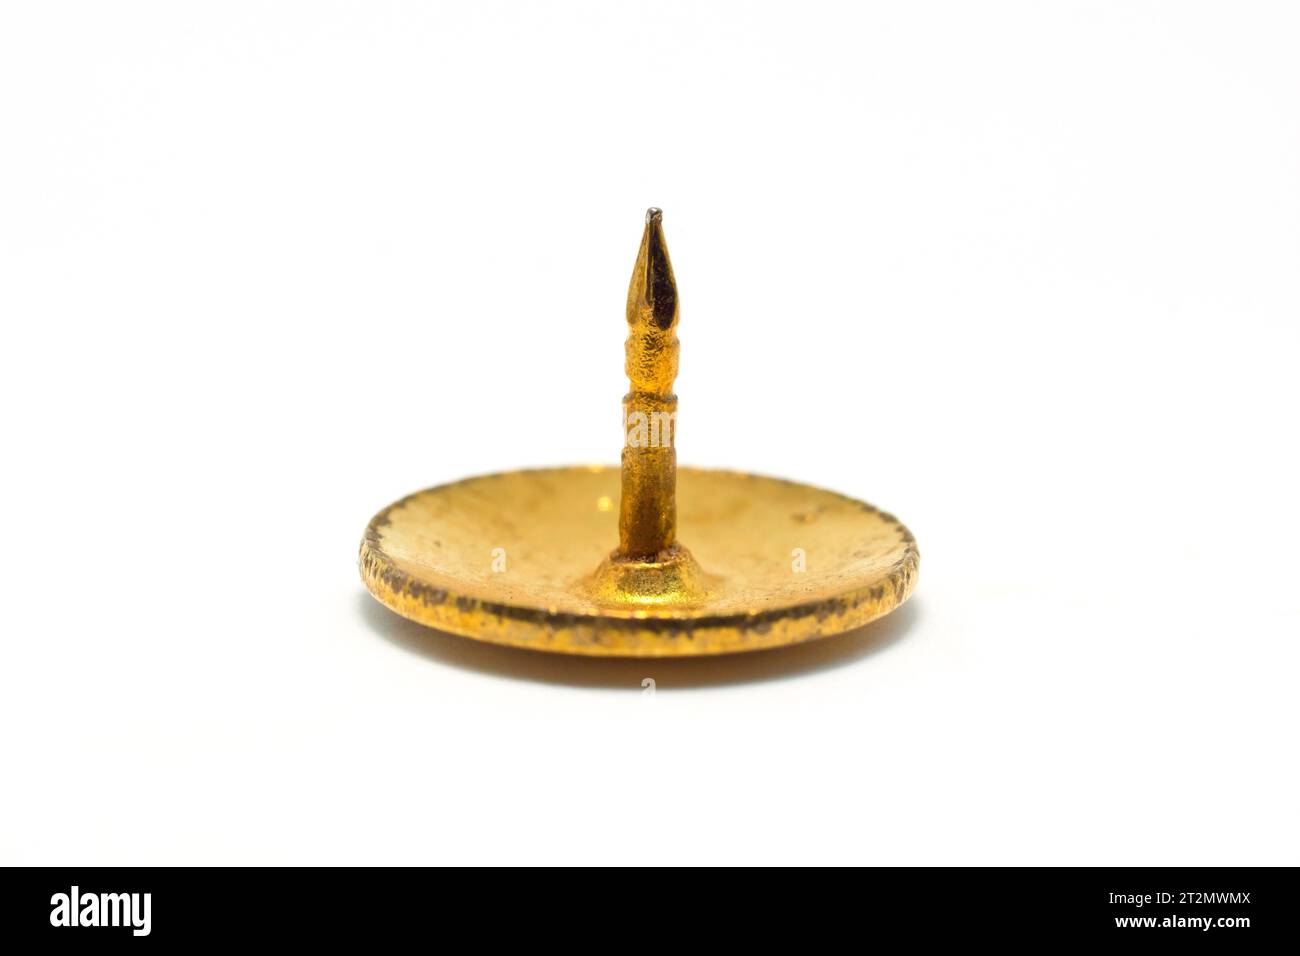 Close up of a single brass drawing pin, push pin or thumb tack, isolated against a white background. Stock Photo